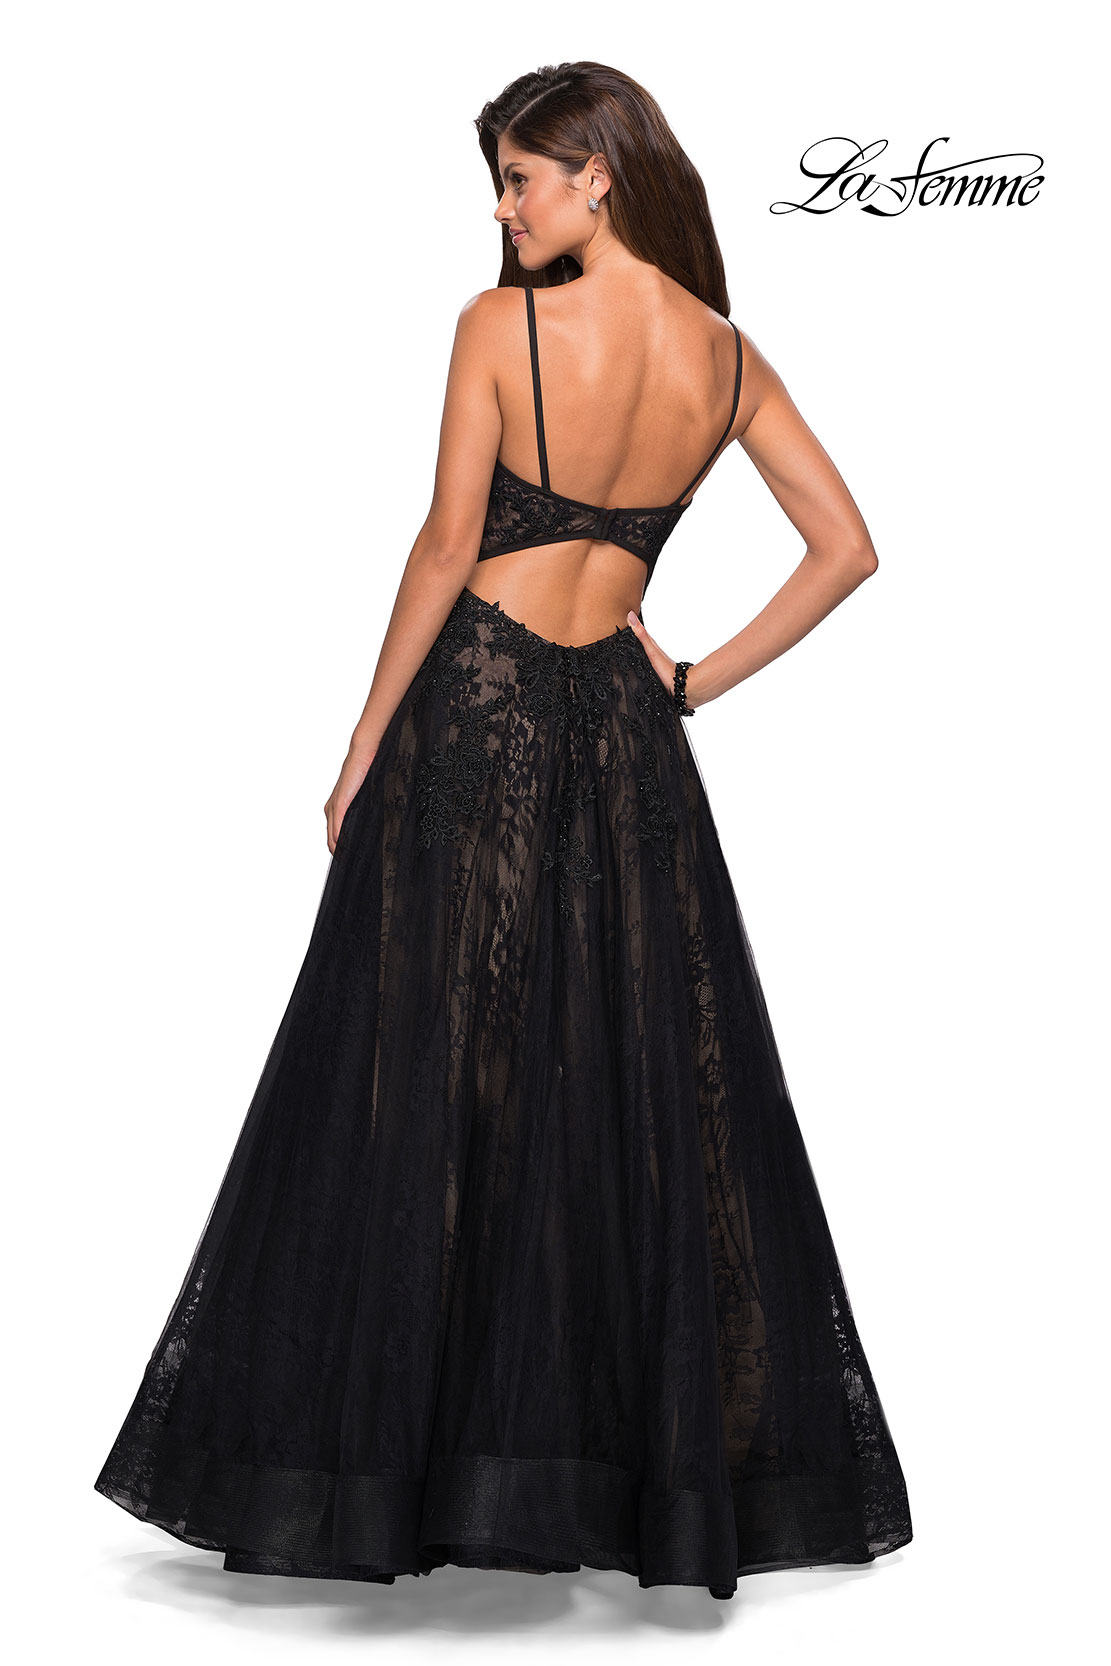 La Femme 31288 So Sweet Boutique Orlando Prom Dresses, A Top 10 Prom Dress  Shop in the US